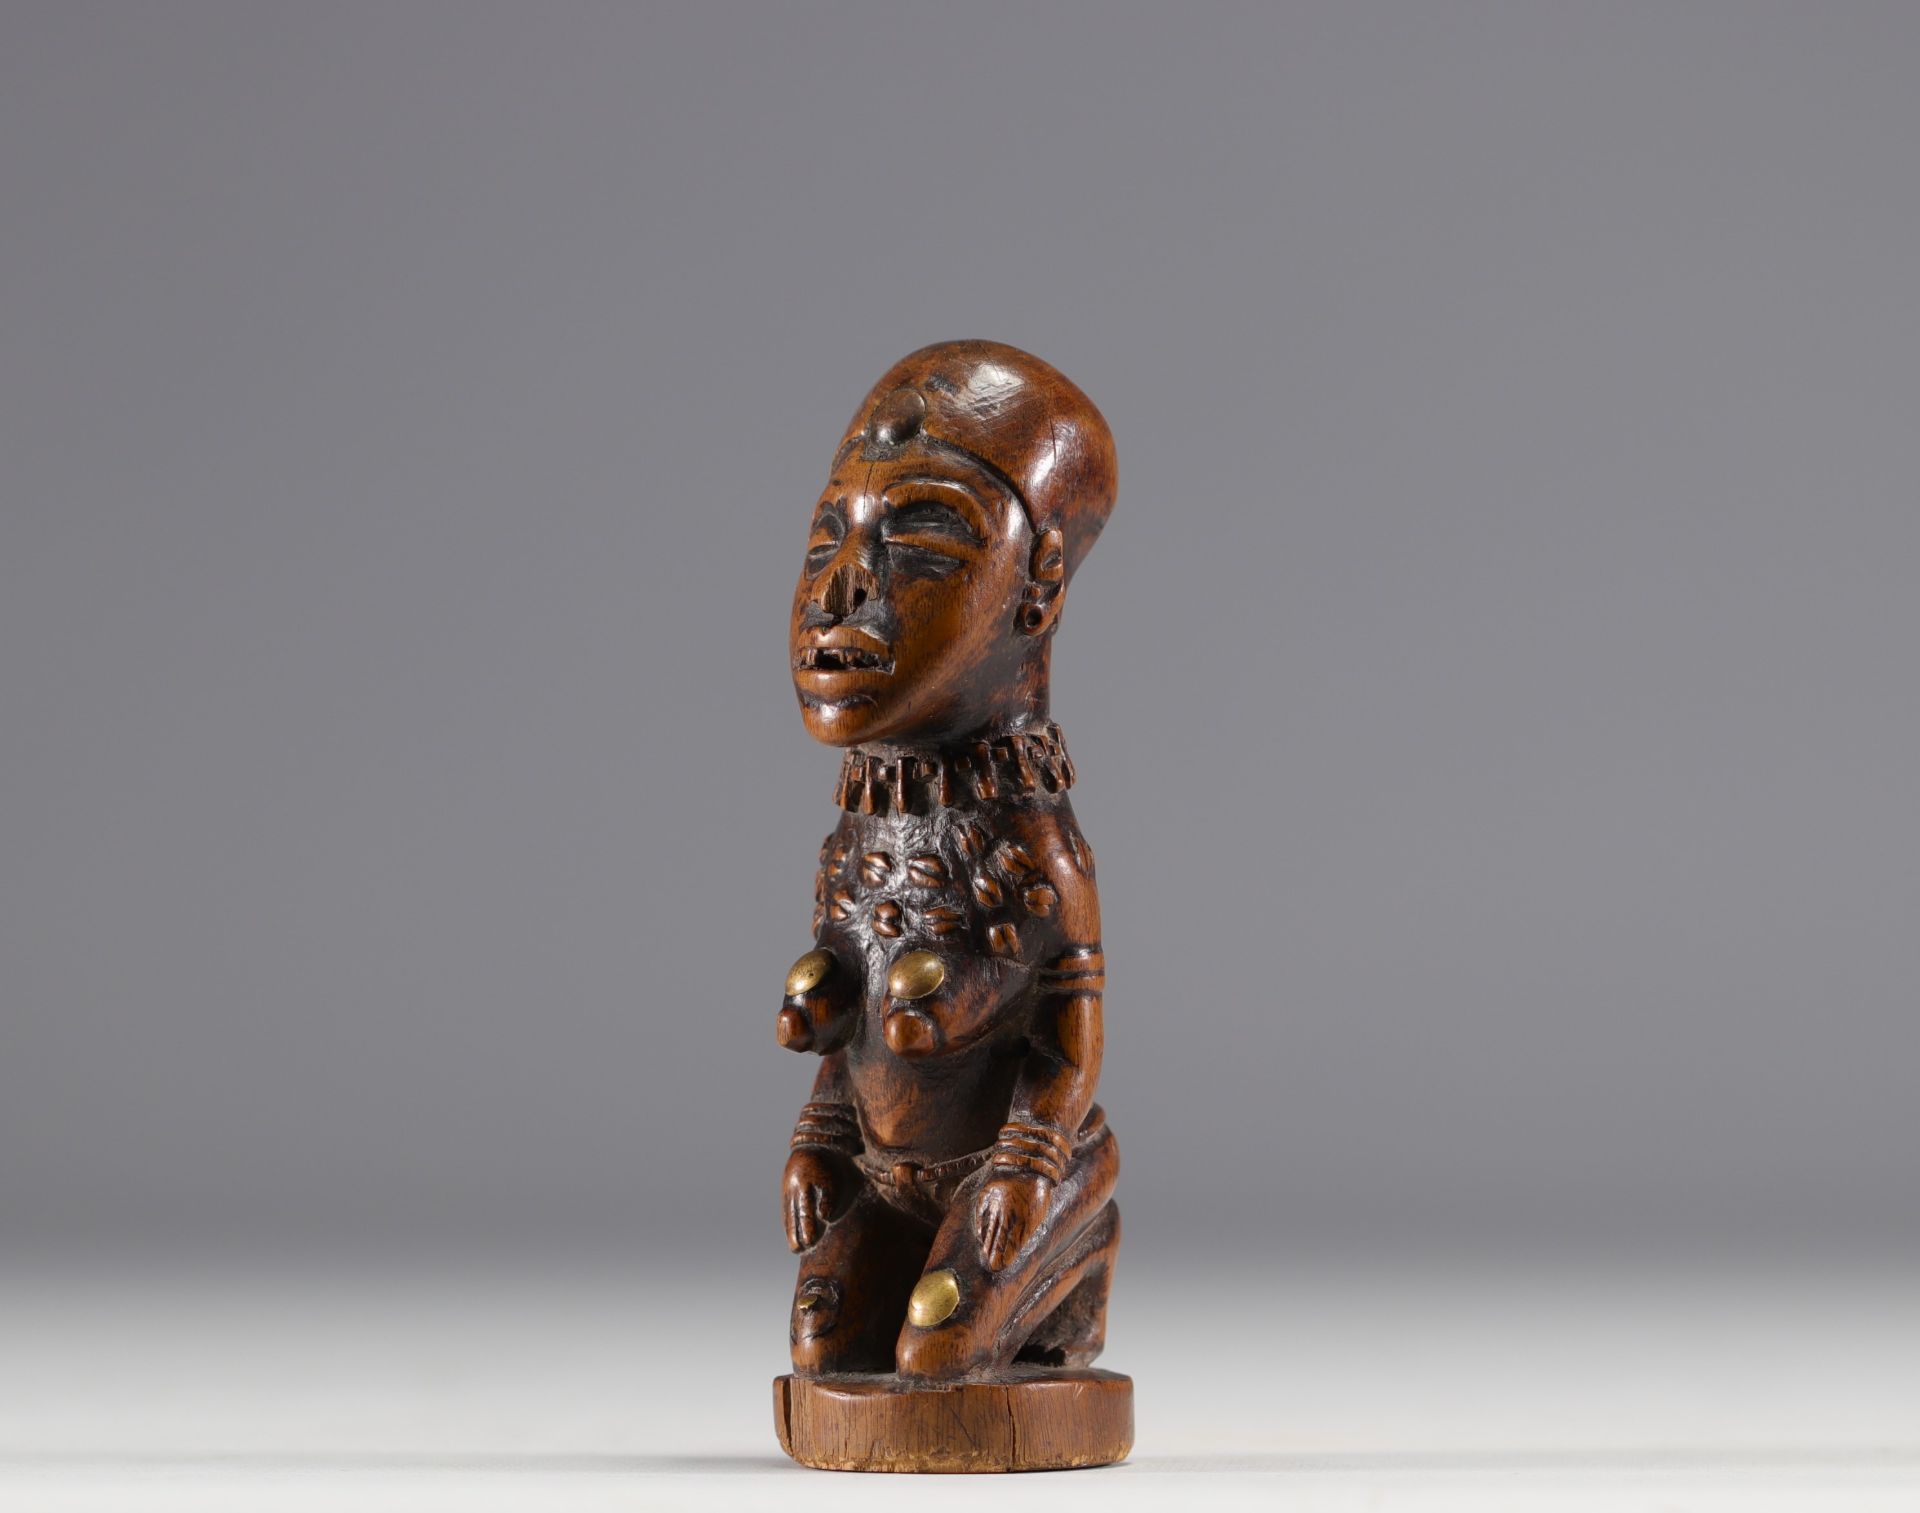 Rare Bas-Congo statuette in carved wood with scarification marks and nails from the 1900s - Image 6 of 6